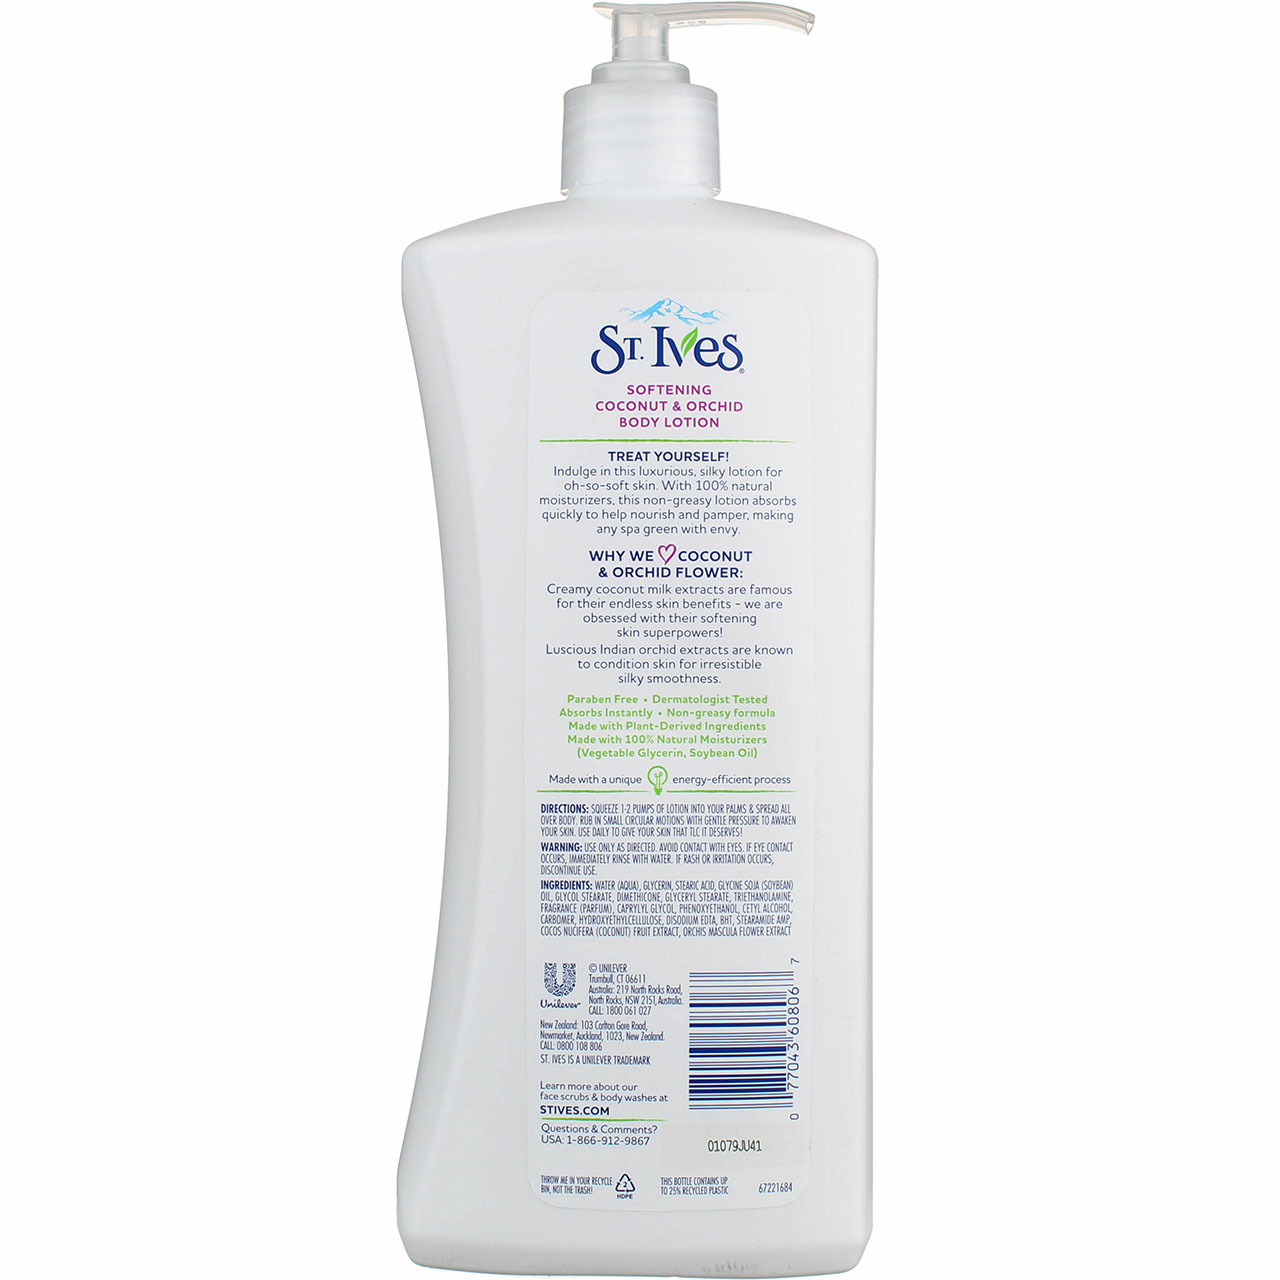 St Ives Softening Coconut and Orchid Body Lotion, 21 Oz - image 2 of 2